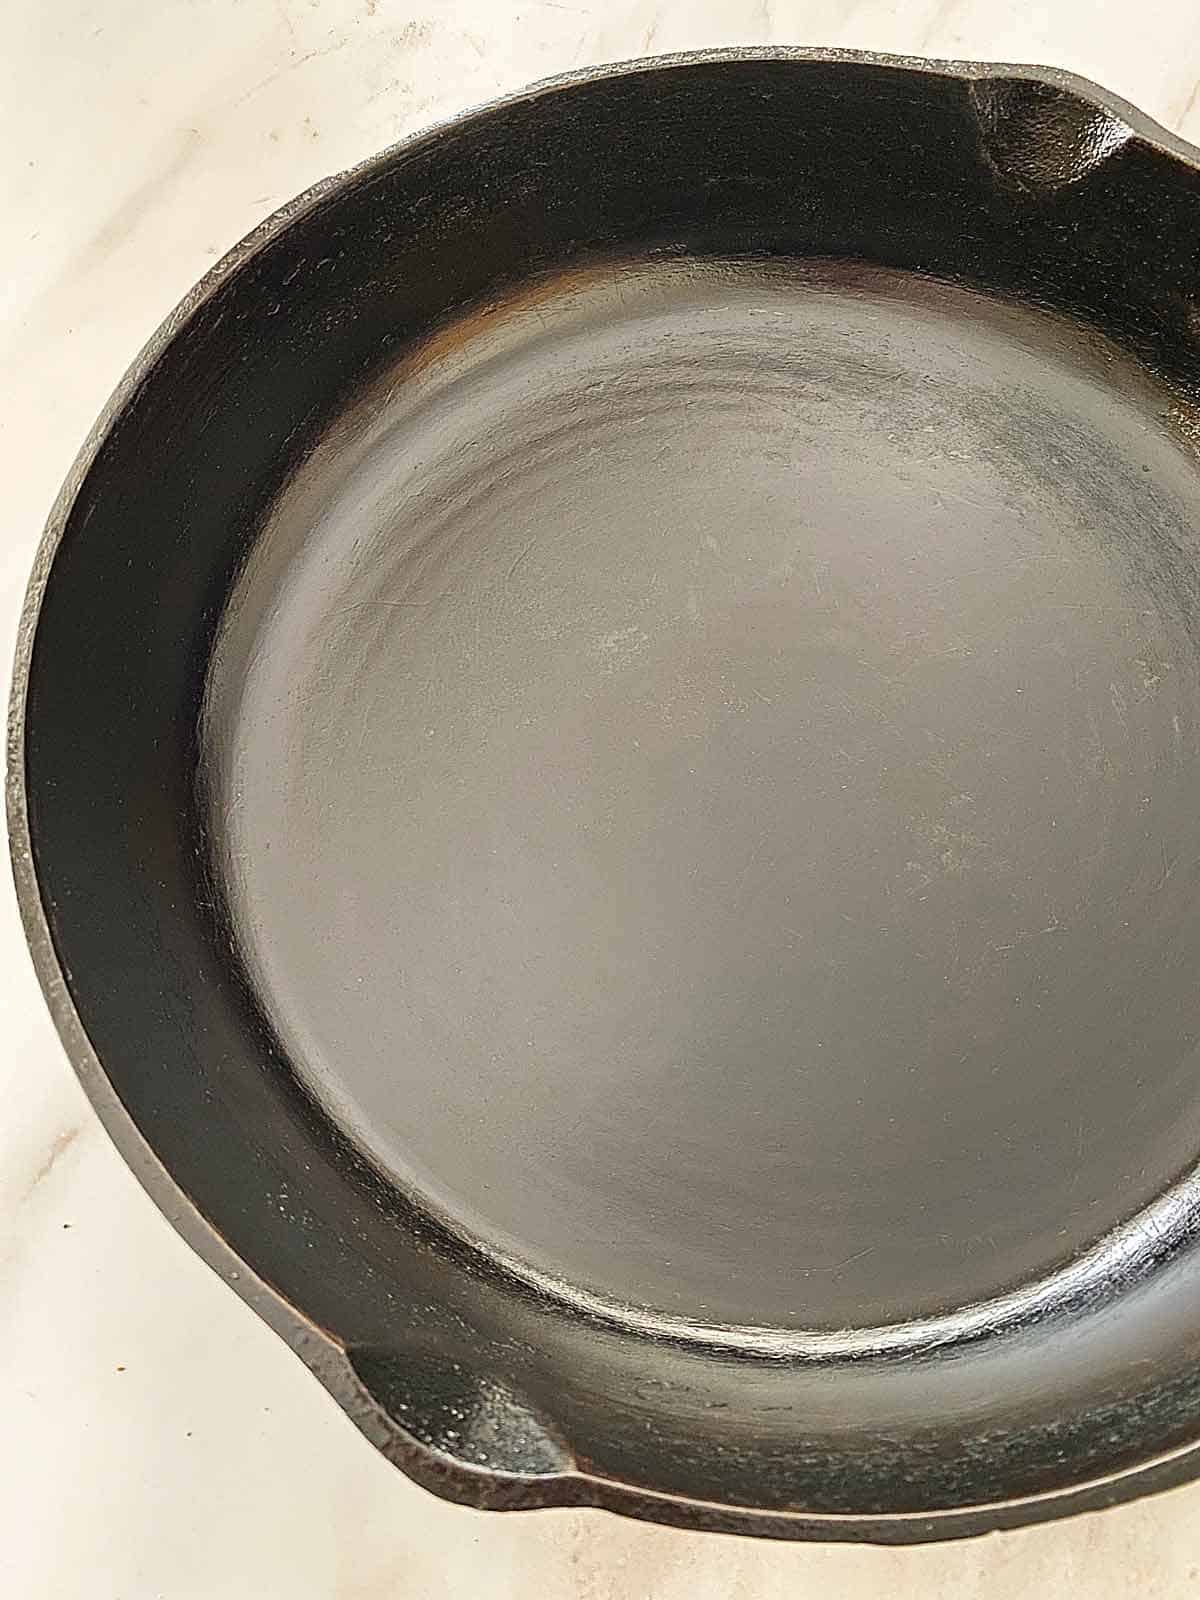 A perfectly seasoned cast iron skillet.